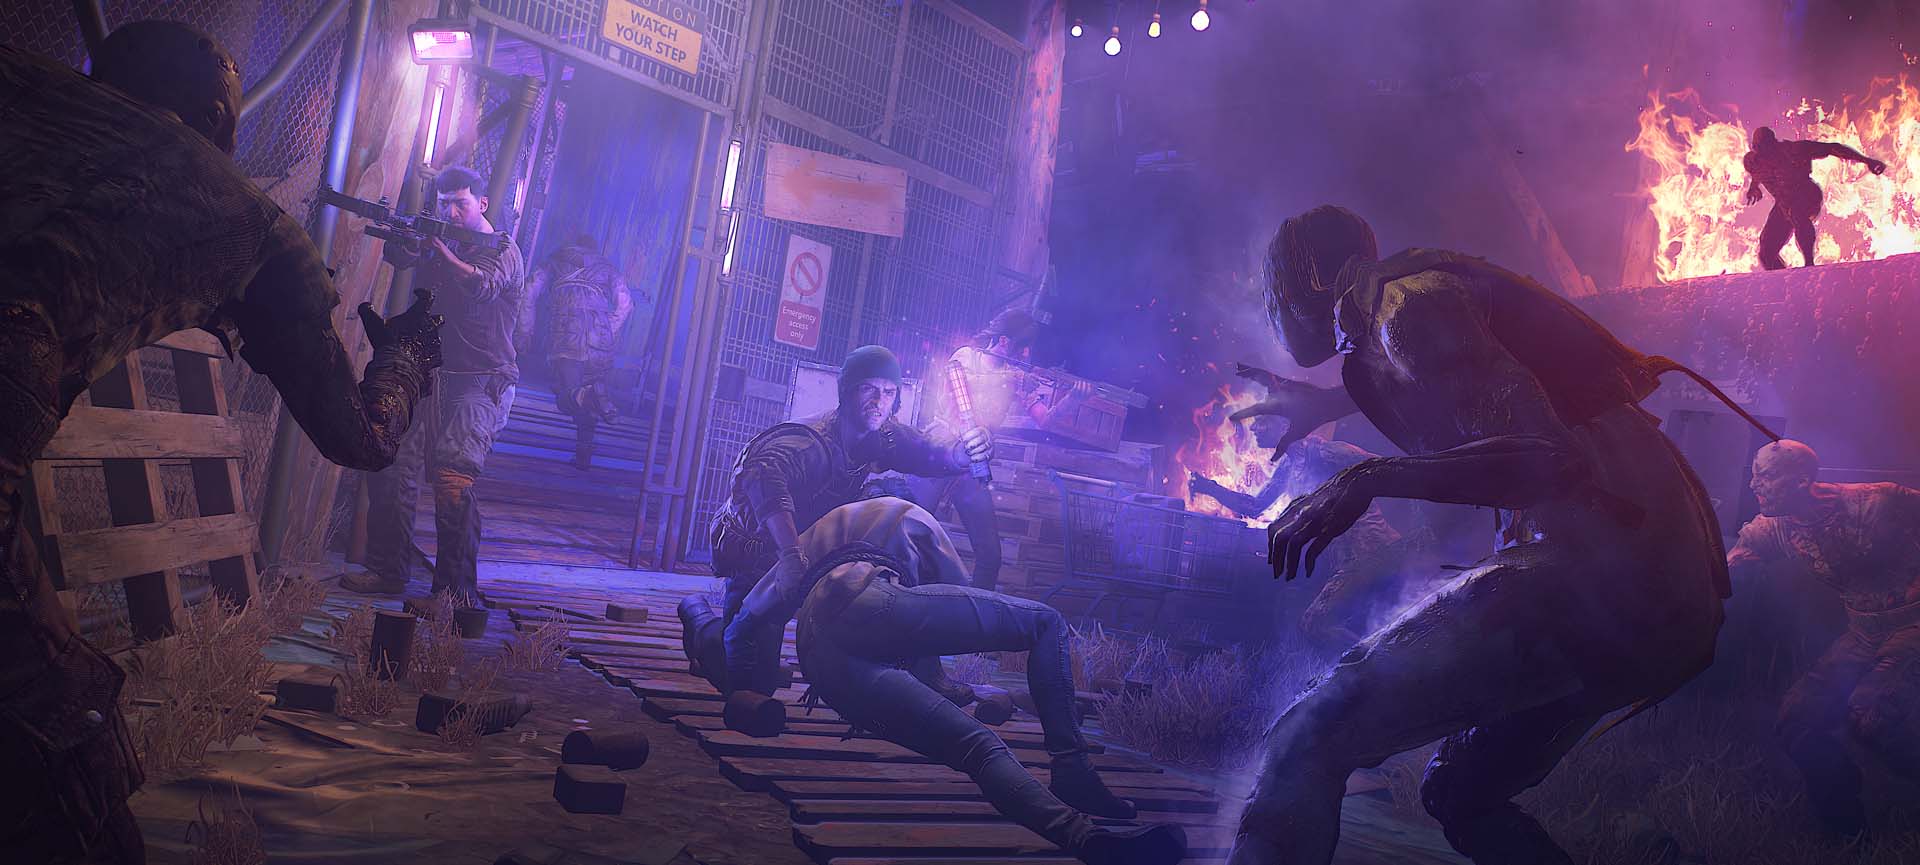 Dying Light Receives Cross-play Support on PC, Launches on the